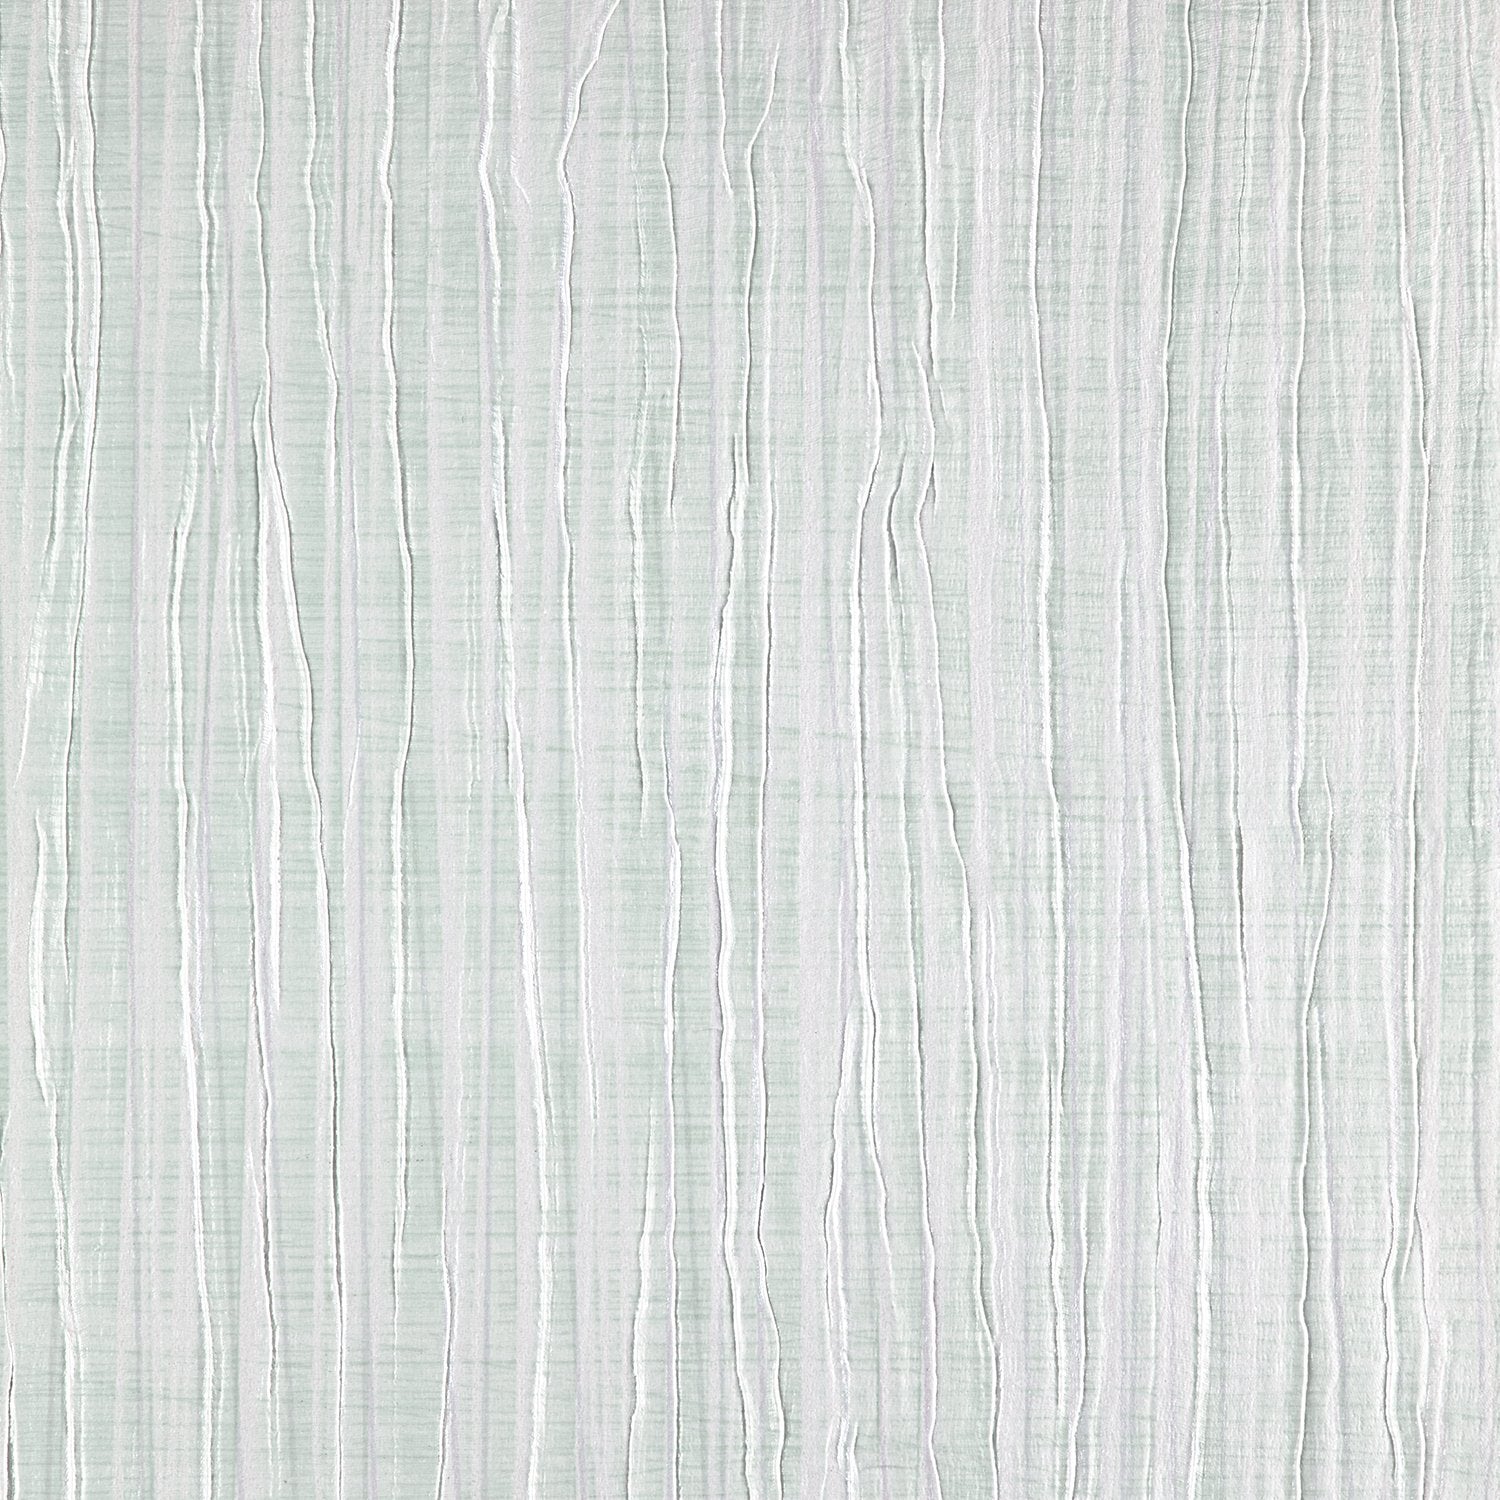 Vogue Pleat - Y47010 - Wallcovering - Vycon - Kube Contract